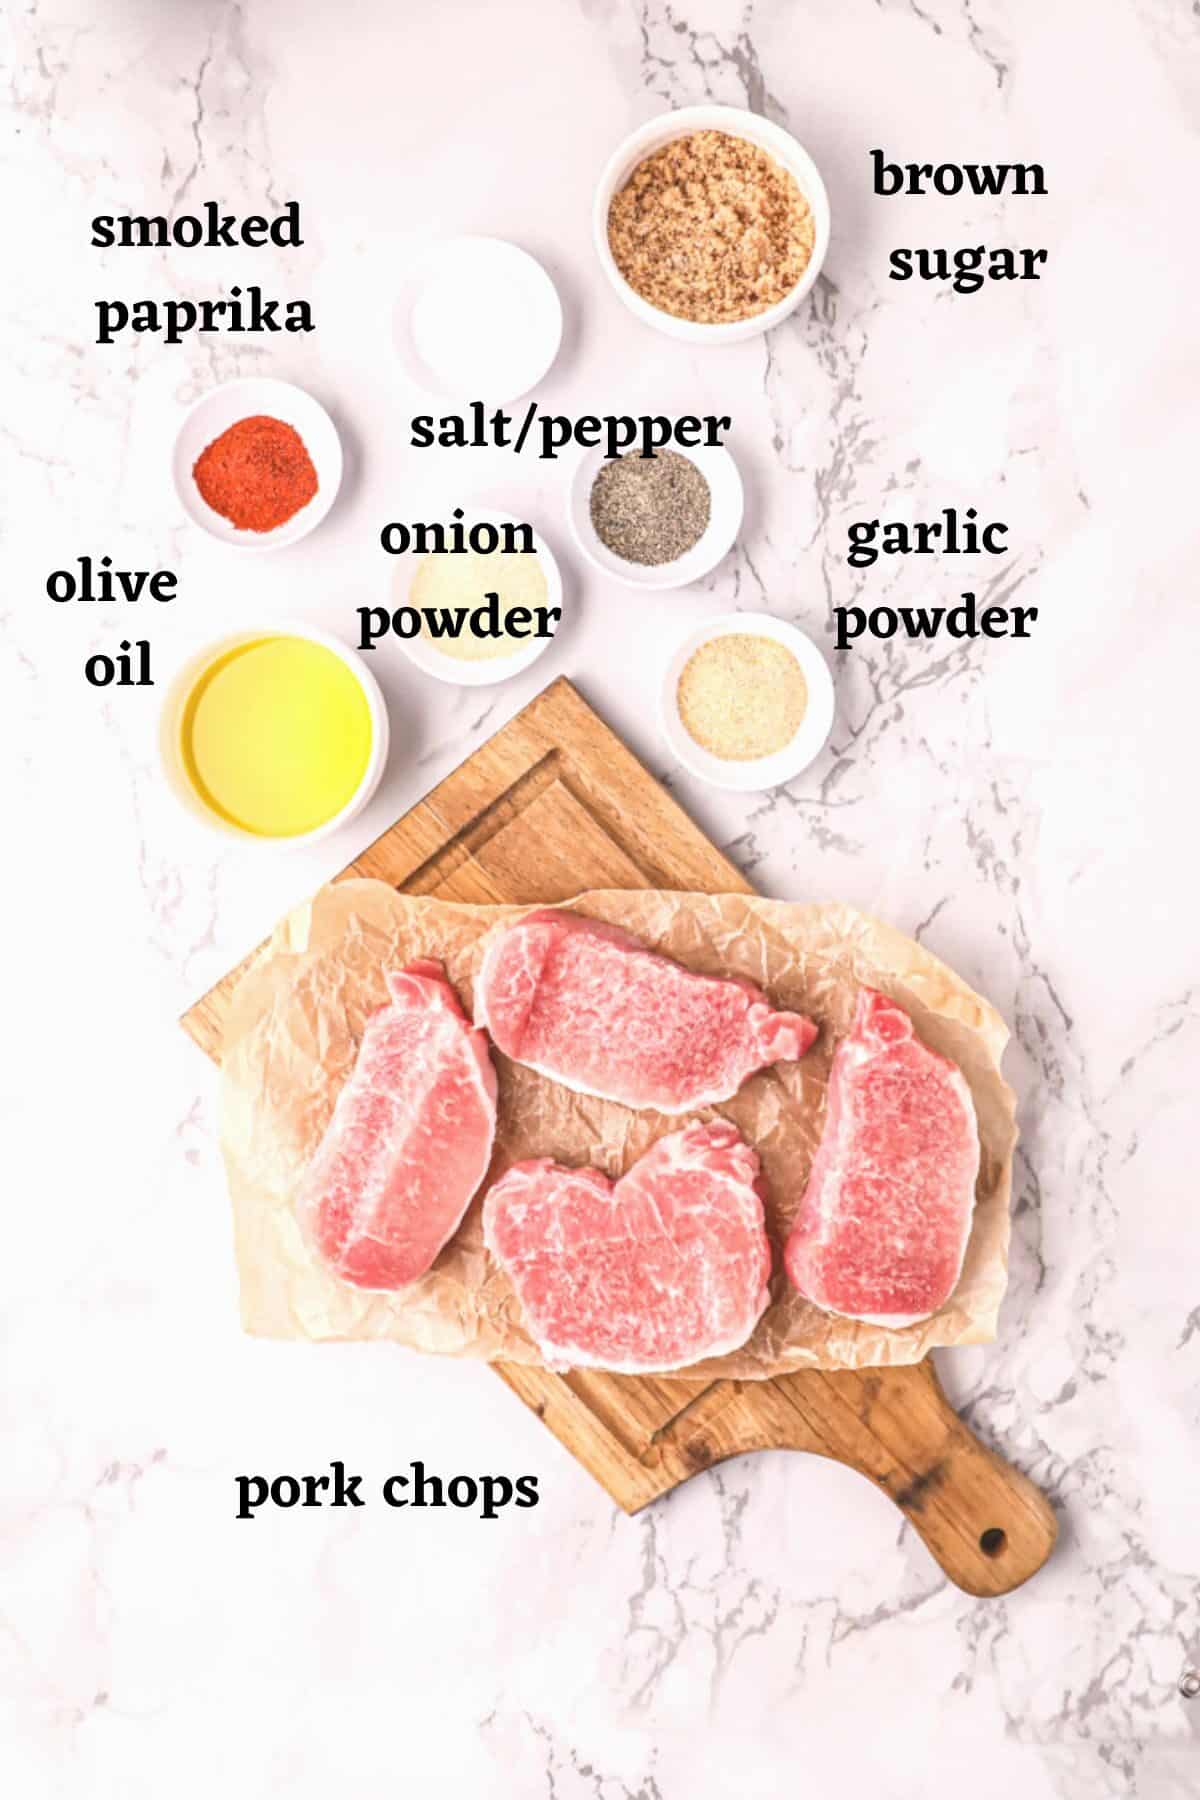 Ingredients needed to make frozen pork chops in the oven.